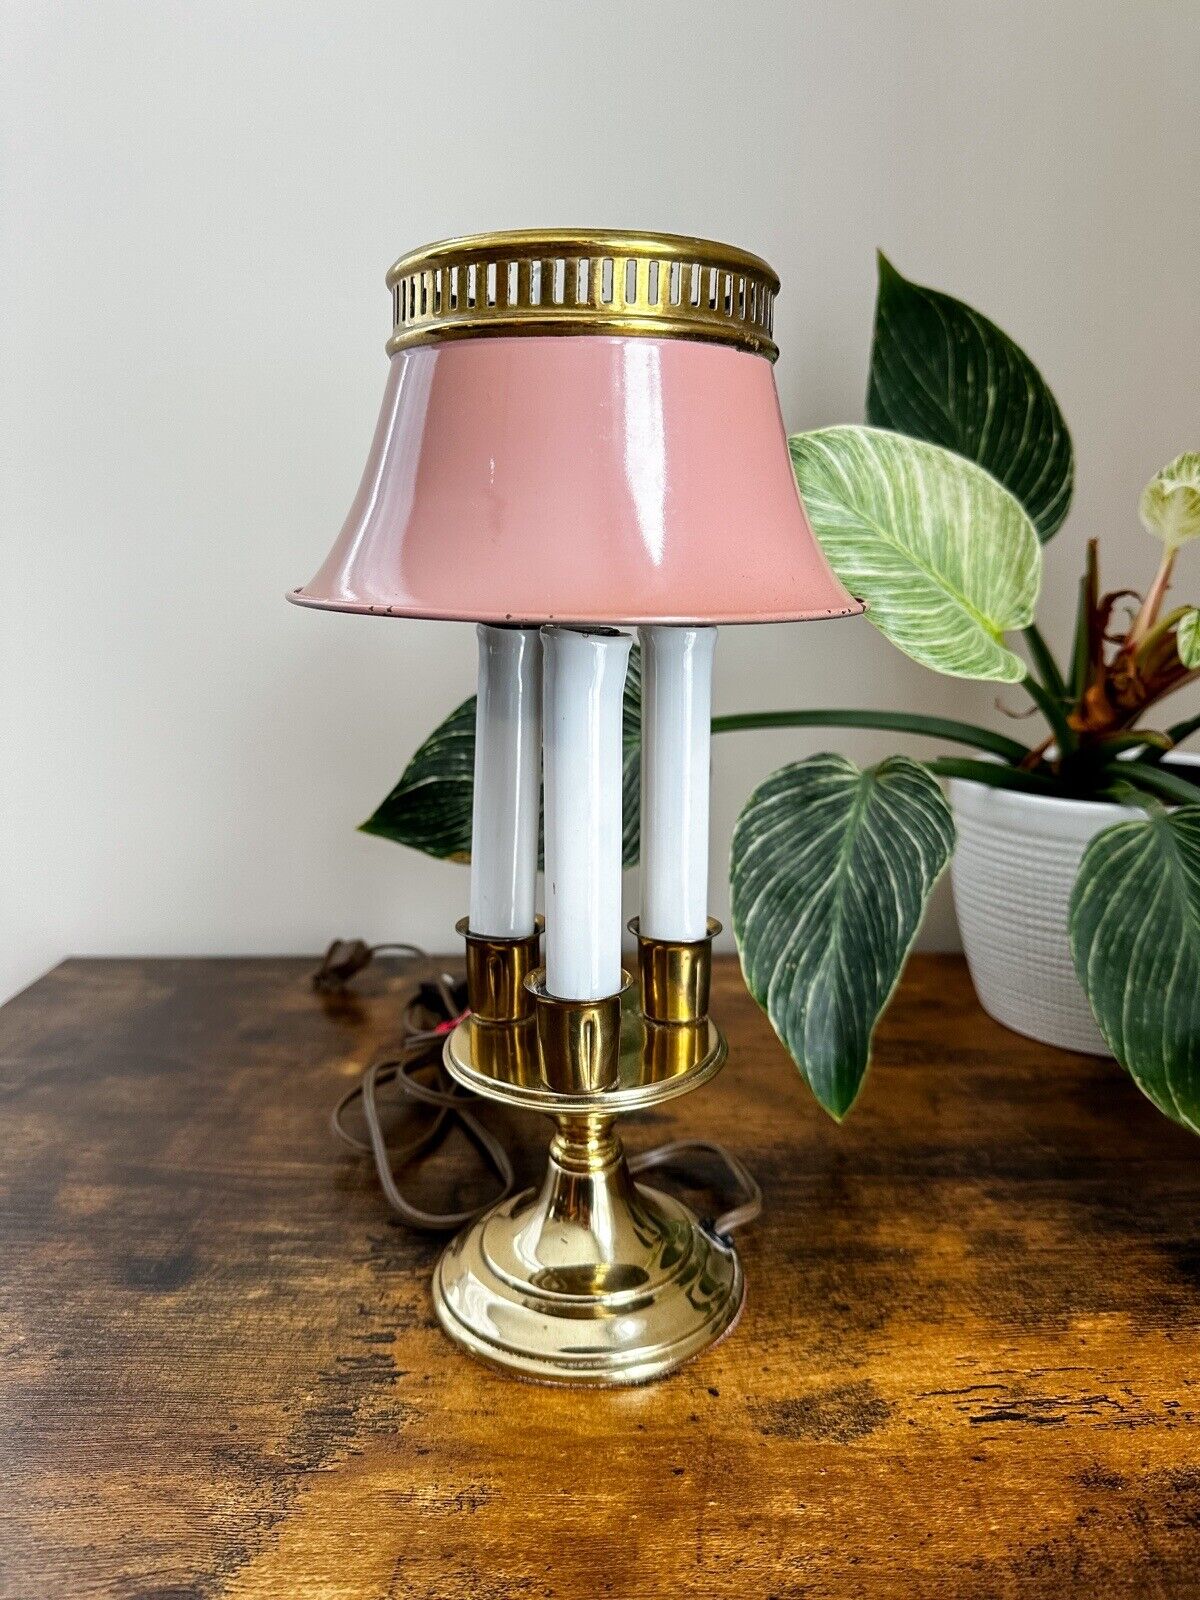 Vintage French Bouillotte Candlestick Table Lamp Pink Enamel & Brass Metal Shade